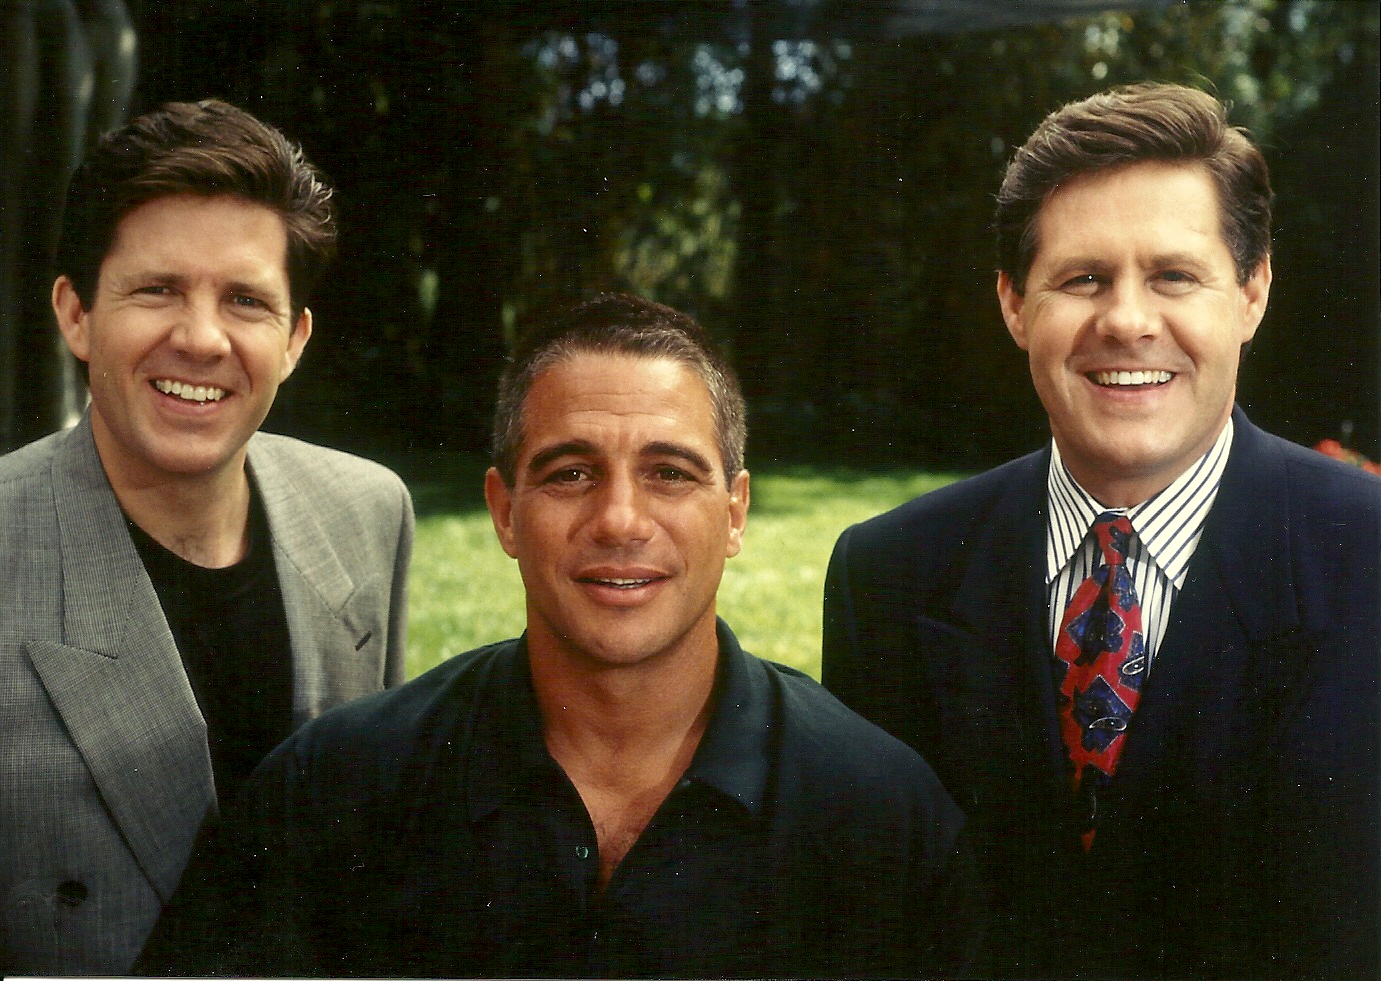 Tony Danza after interview with the McCain Brothers for Good Morning Oklahoma.